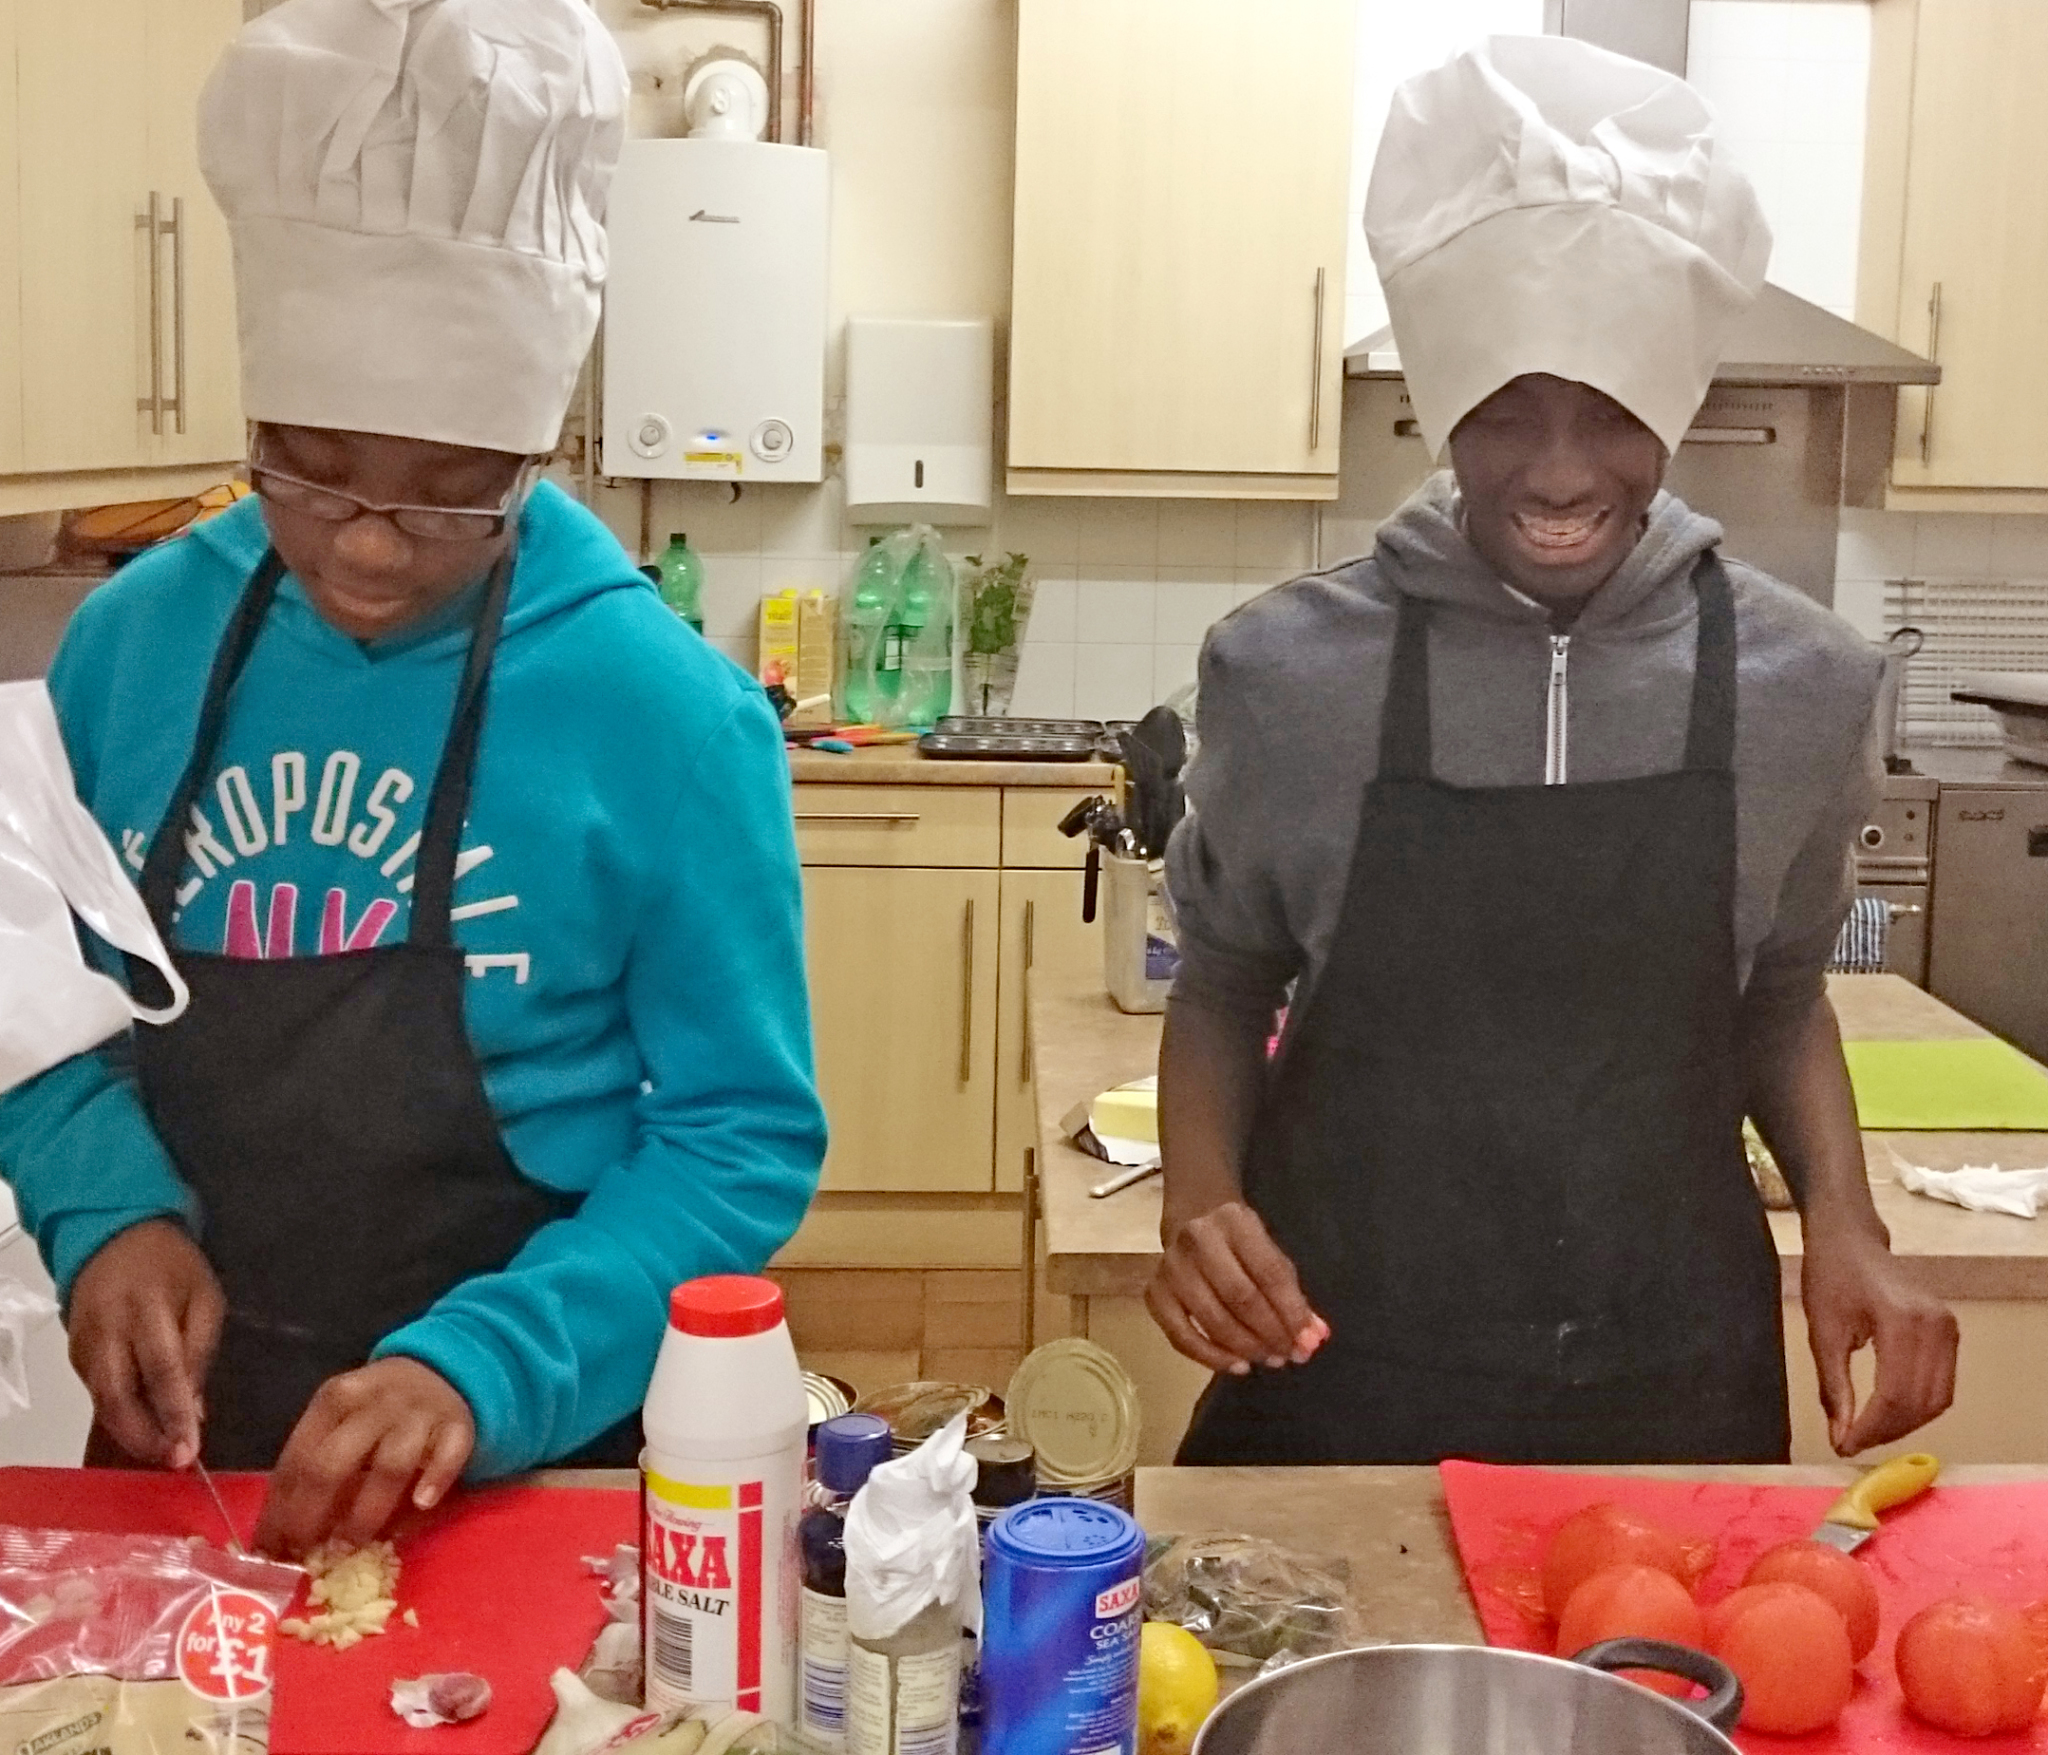 Eat Club - YOUTH WORK – Making a sustainable difference to the future of the young people.